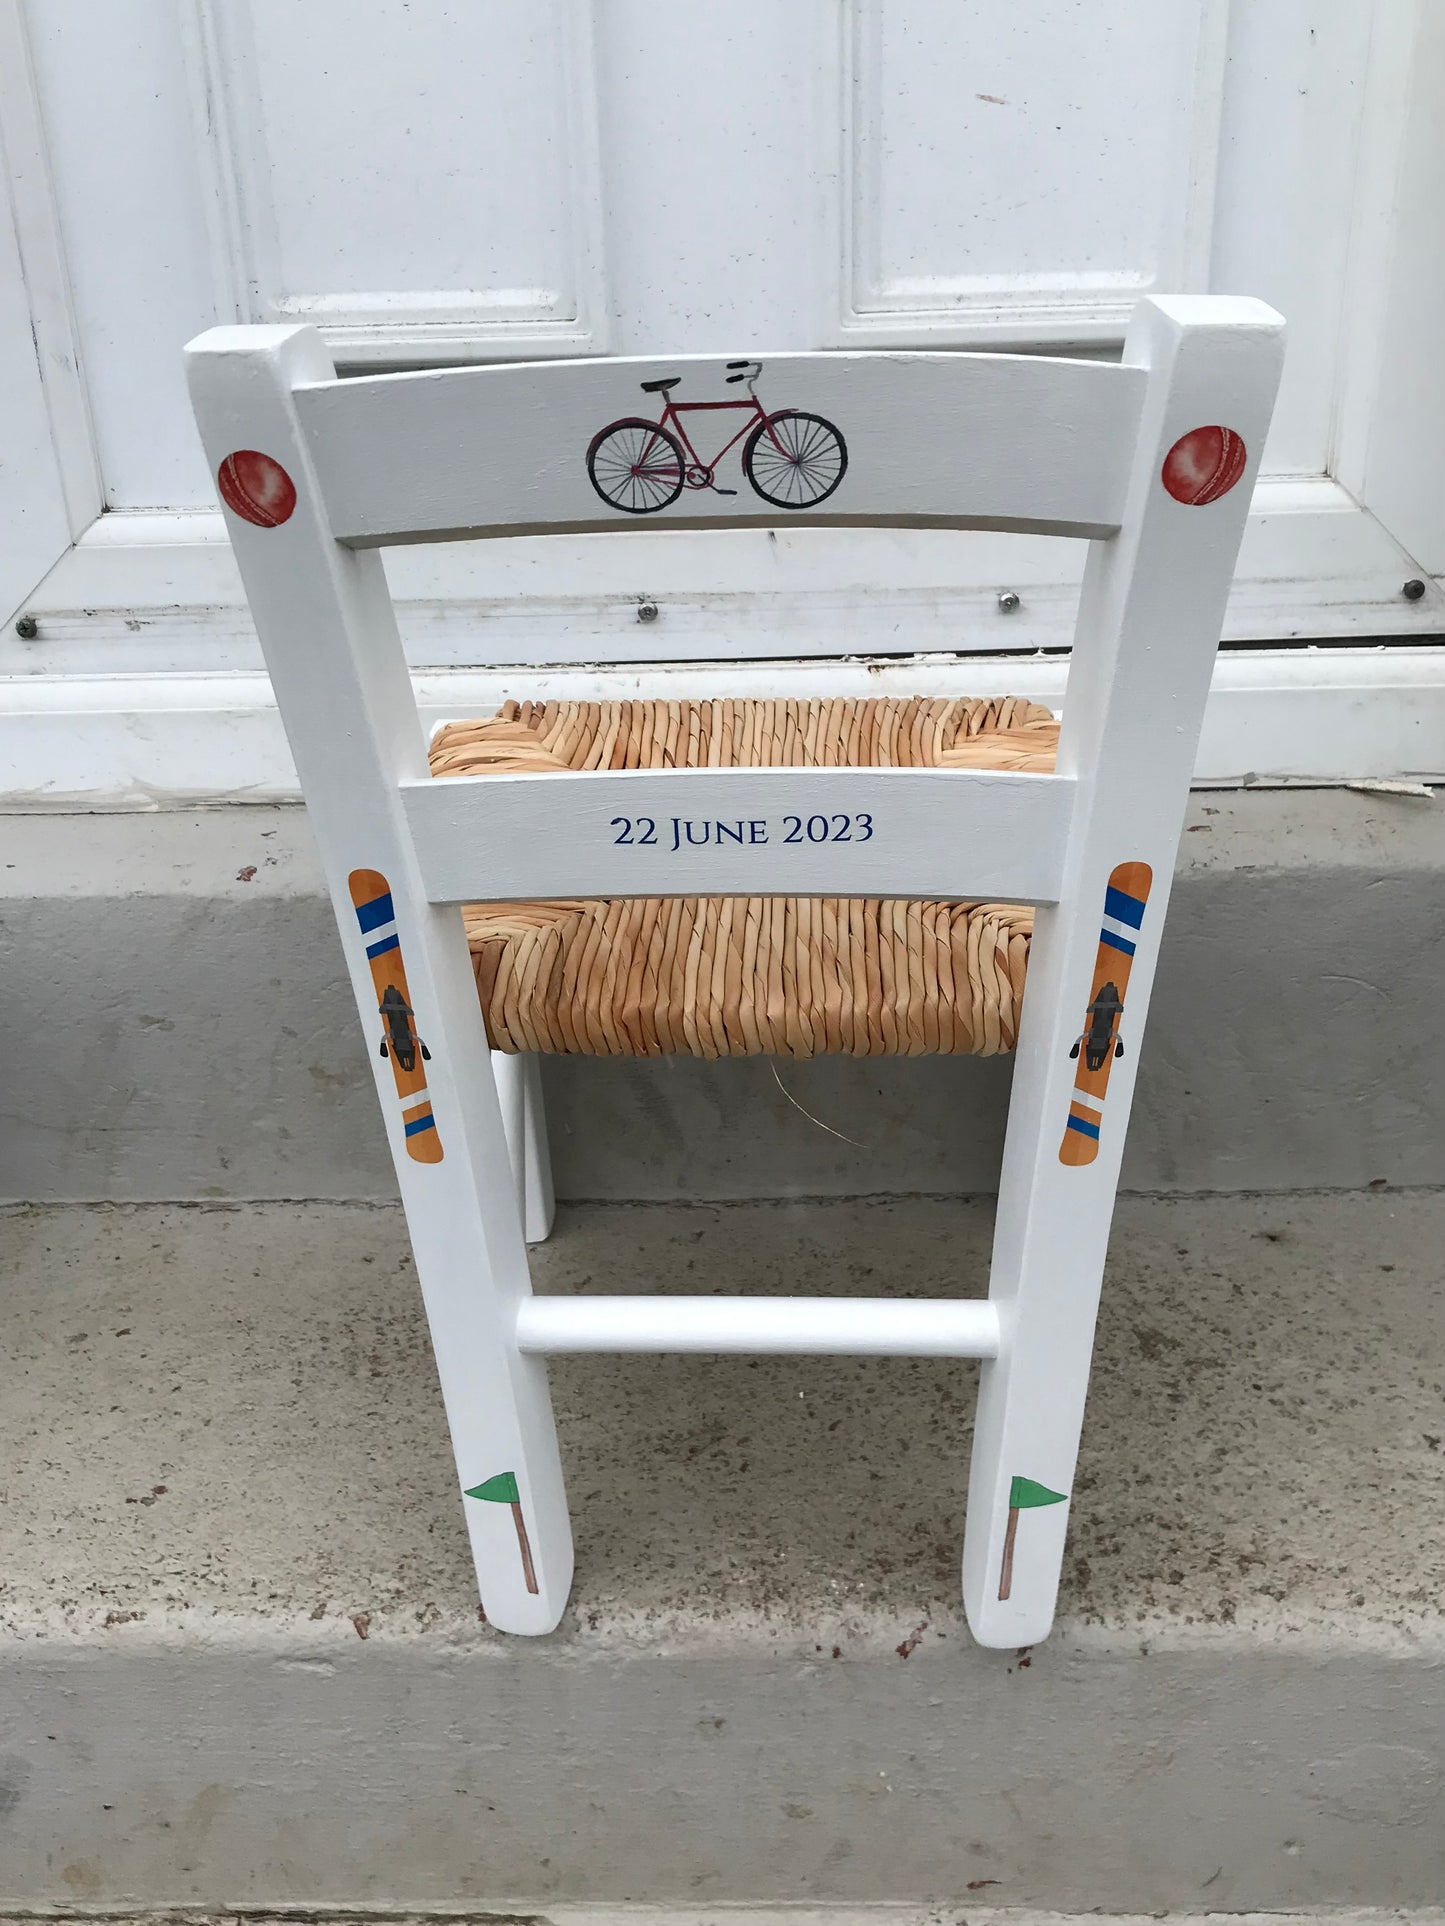 Rush seat personalised children's chair - Sport fan theme - made to order